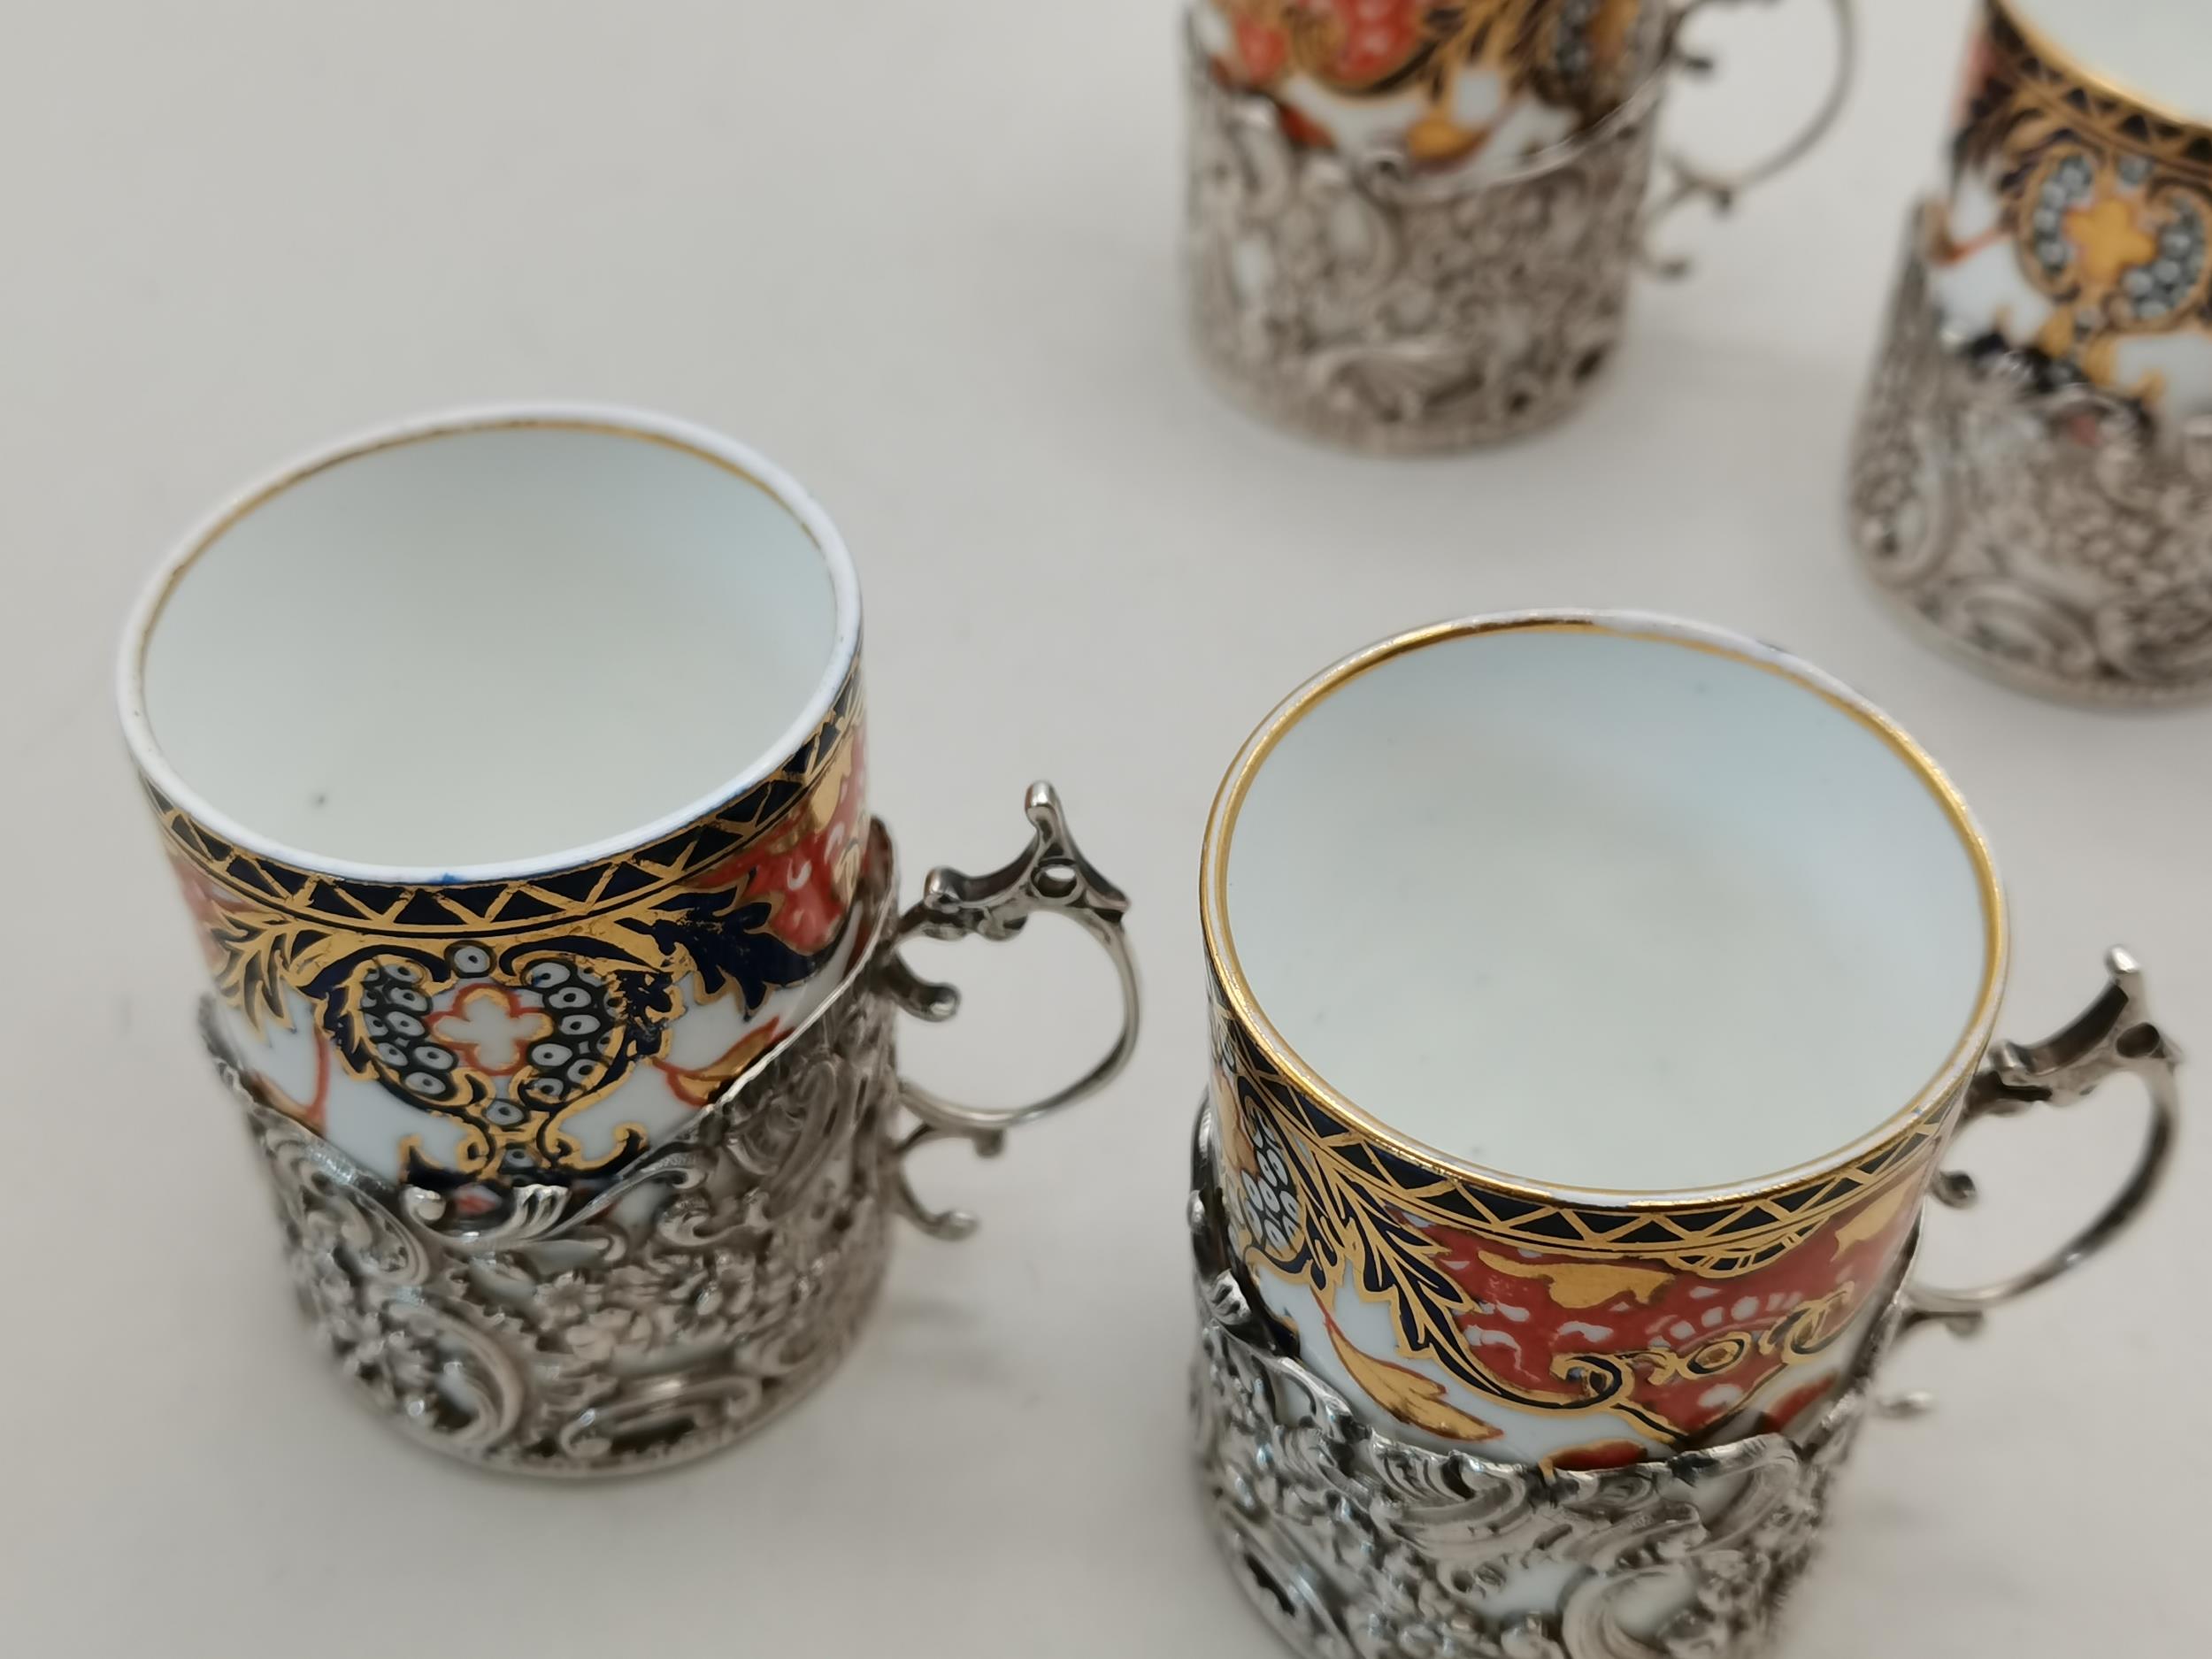 x4 Royal Crown Derby cups in Hallmarked Silver (London) holders - Image 2 of 3